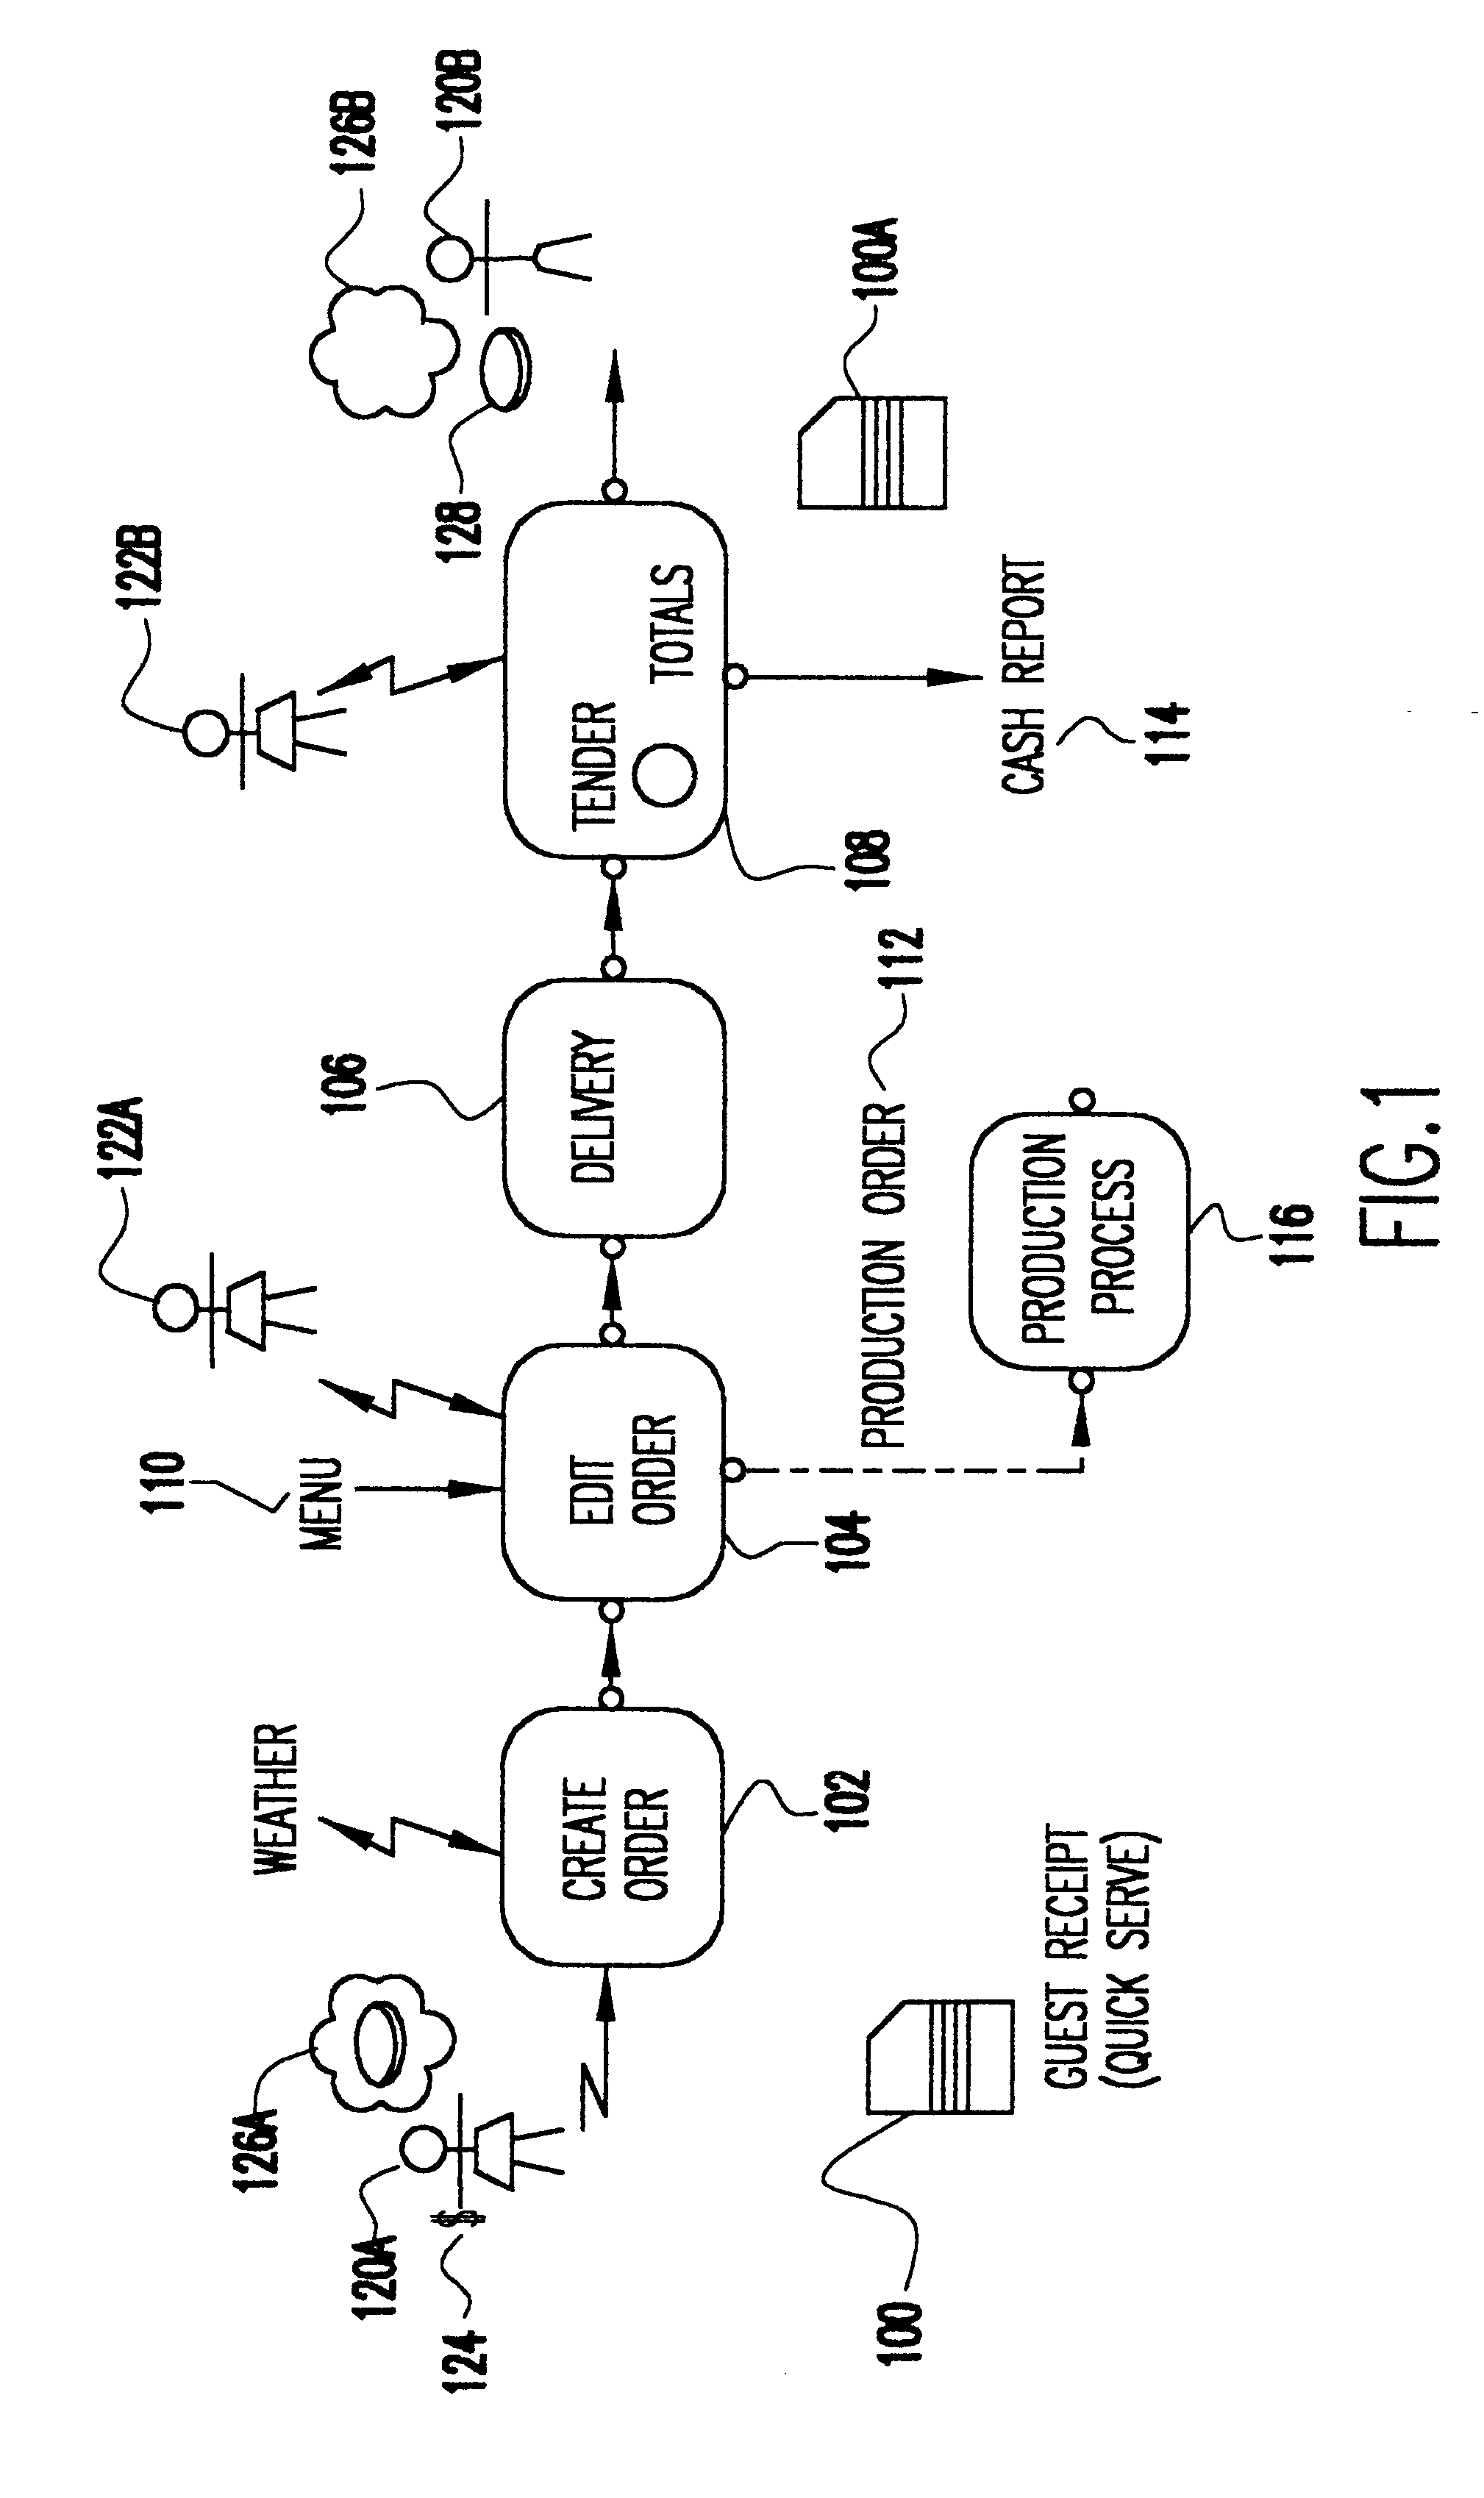 Method and system for specifying and implementing automation of business processes